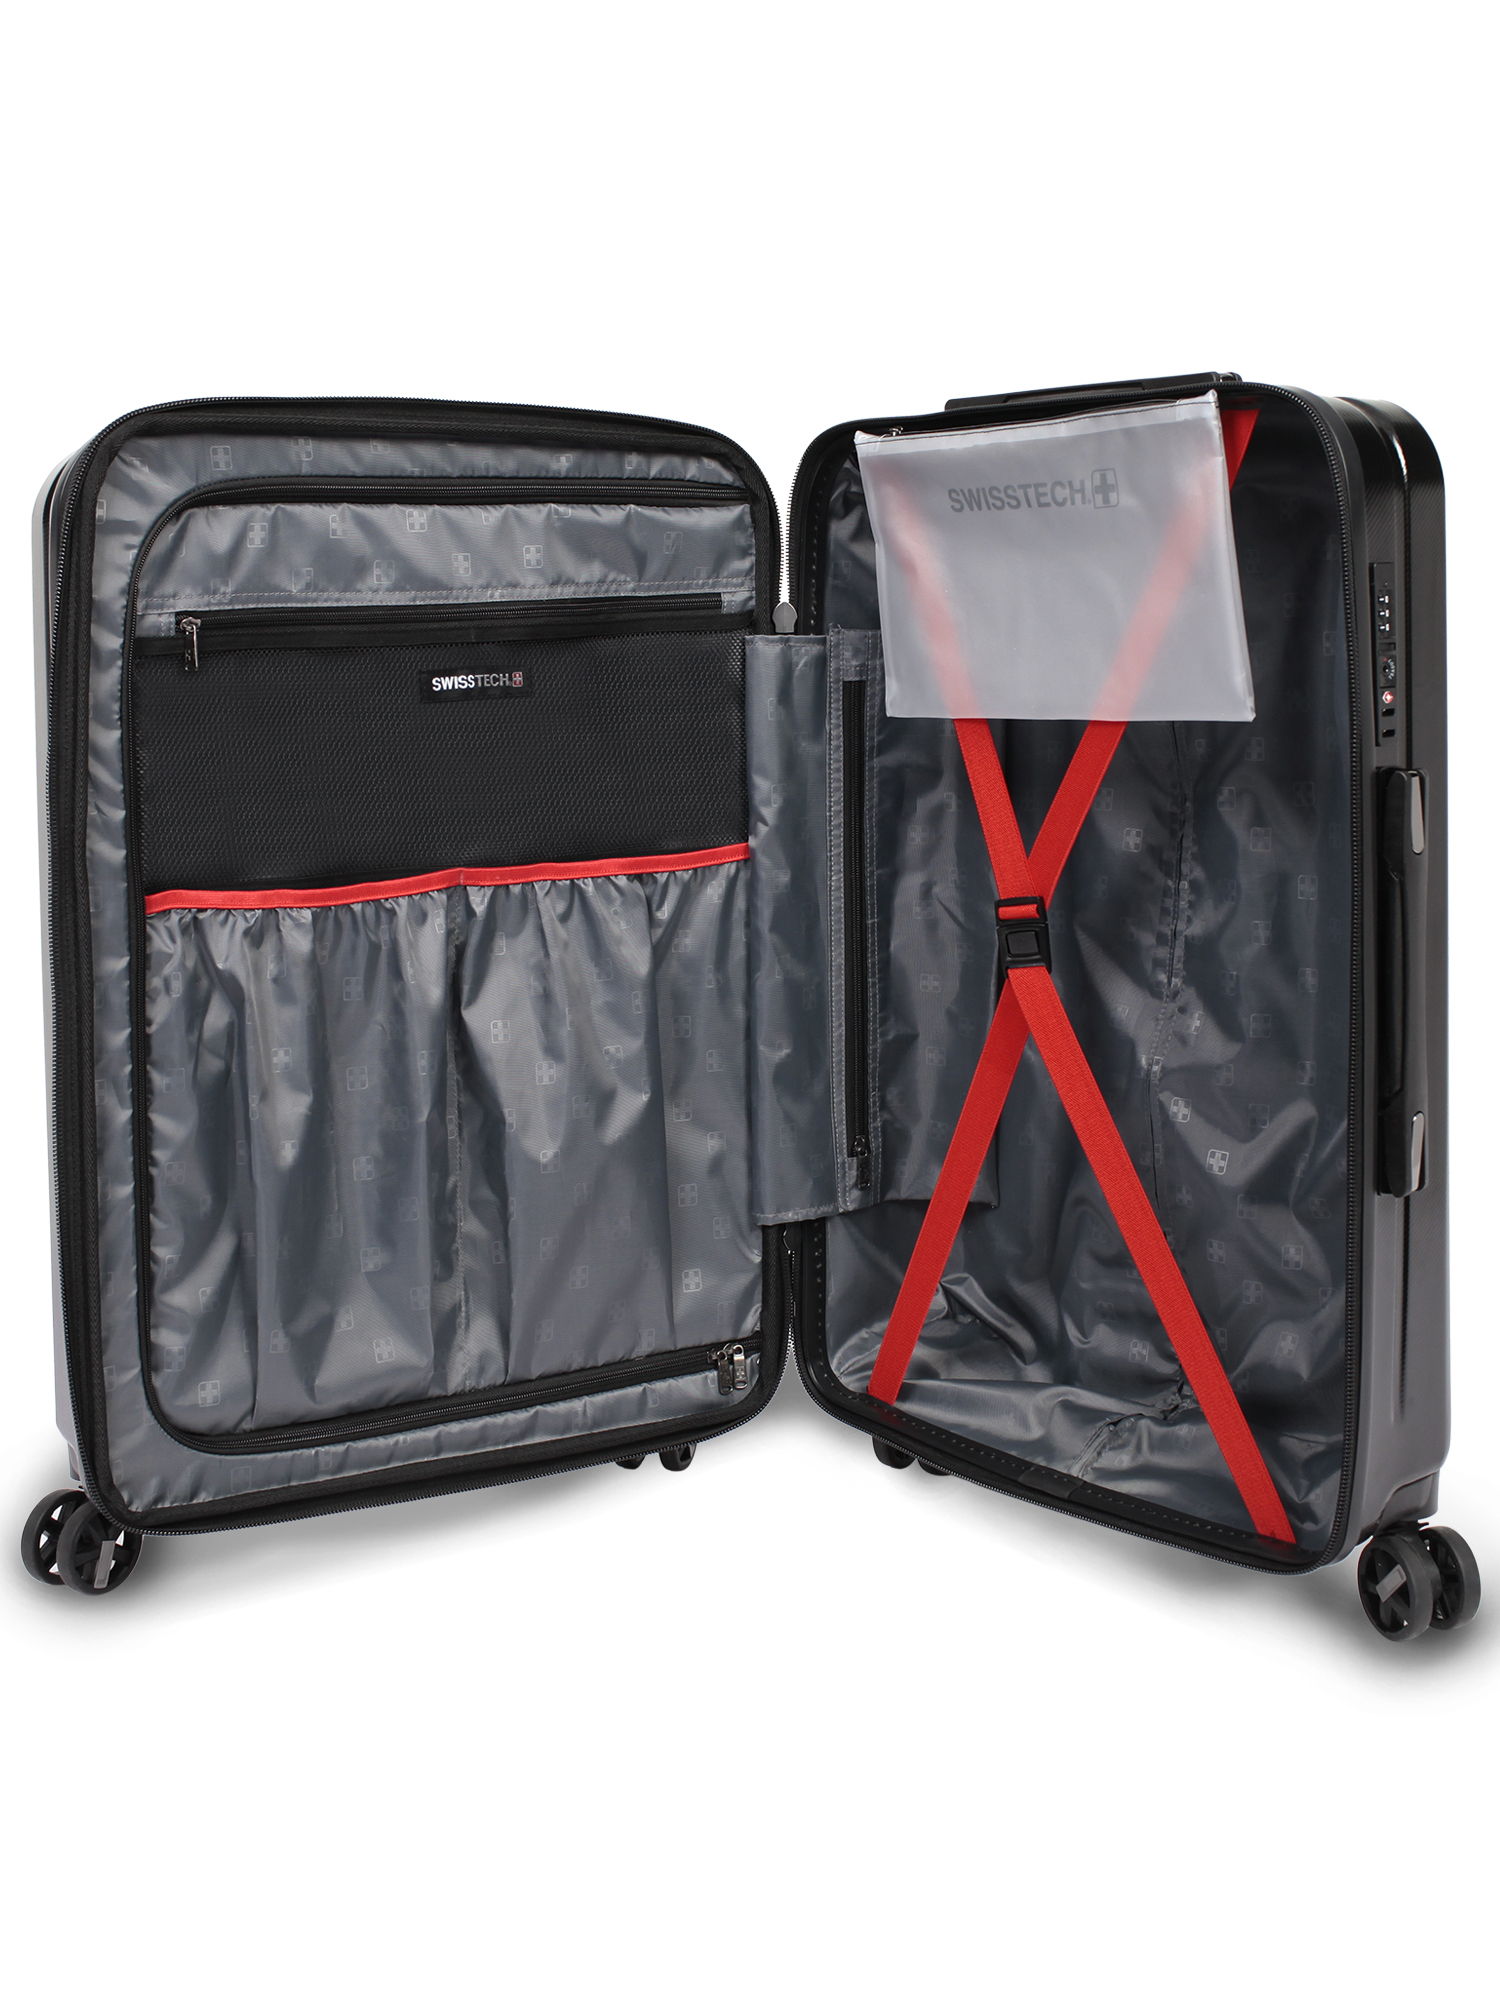 SwissTech Navigation 25" Hardside Checked Luggage, 25"H x 17.5"W x 10"D - image 5 of 16